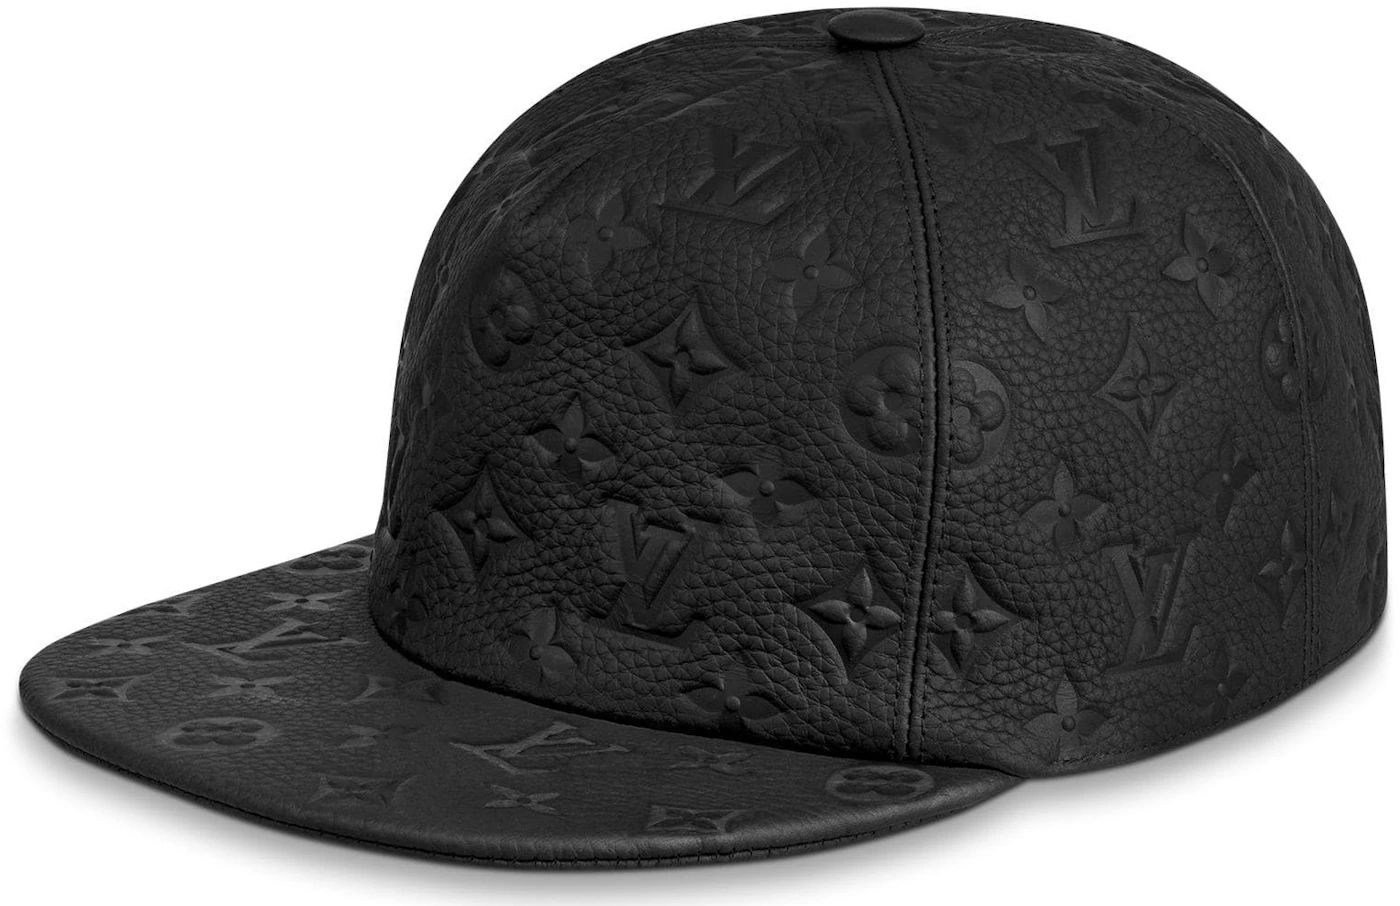 Leather cap Louis Vuitton Black size M International in Leather